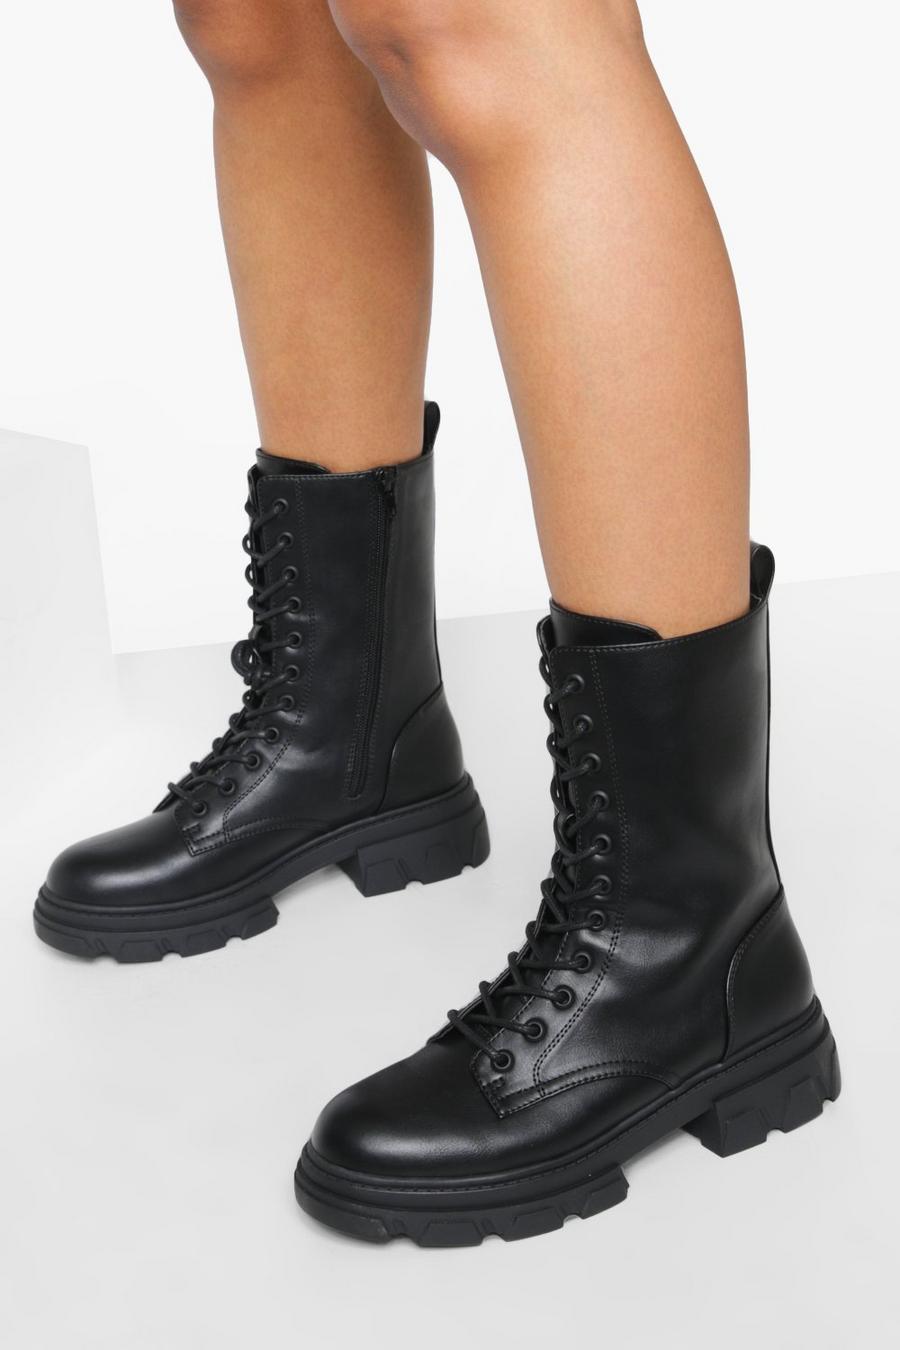 Black noir Chunky Cleated Sole Hiker Boots